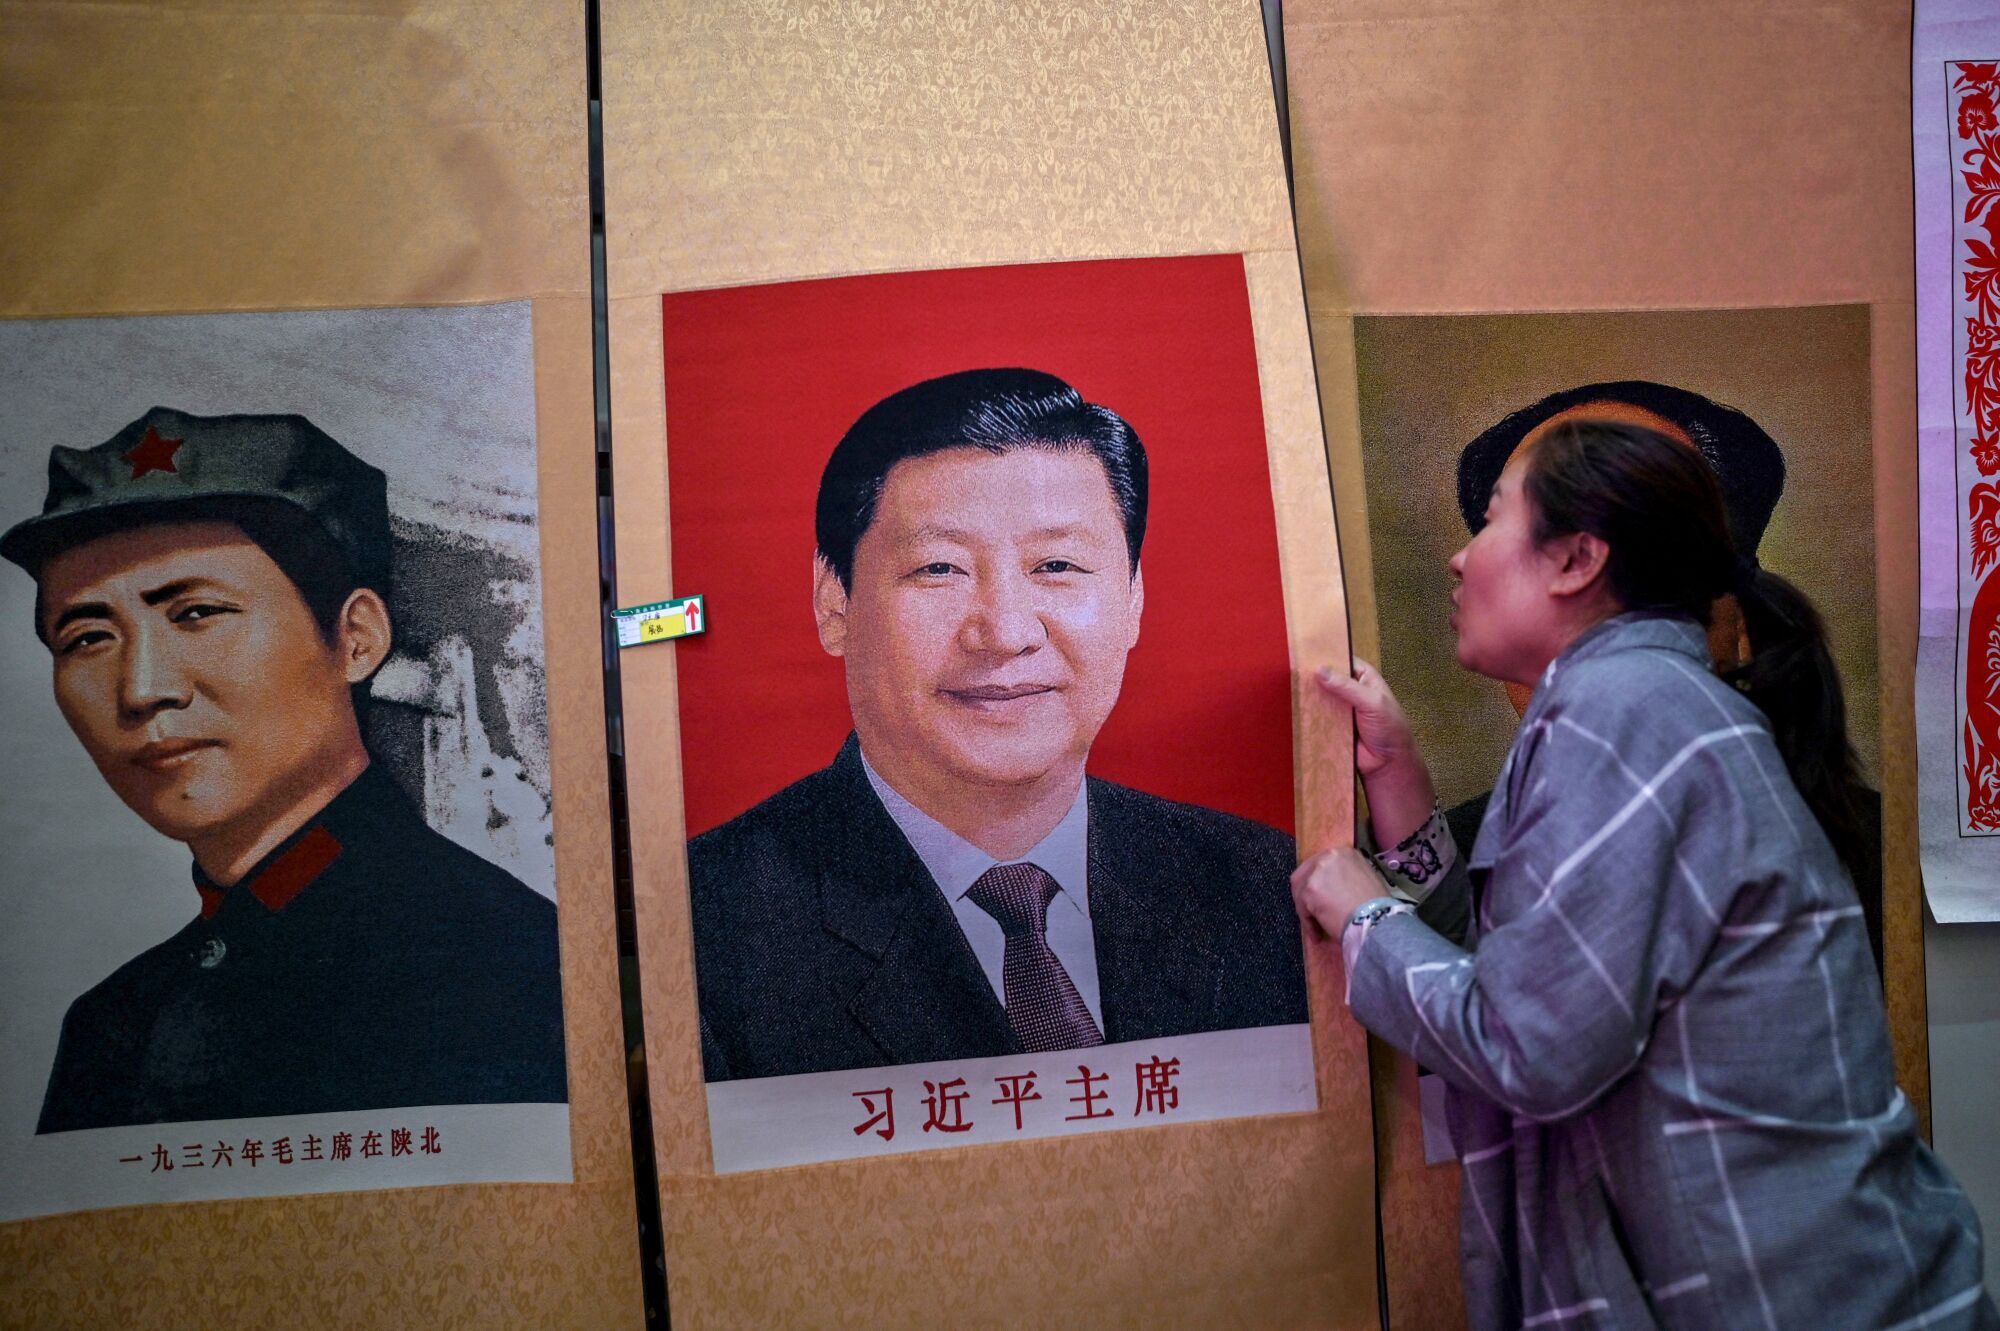 A woman holds a color poster depicting a smiling man next to another poster of a Chinese revolutionary 